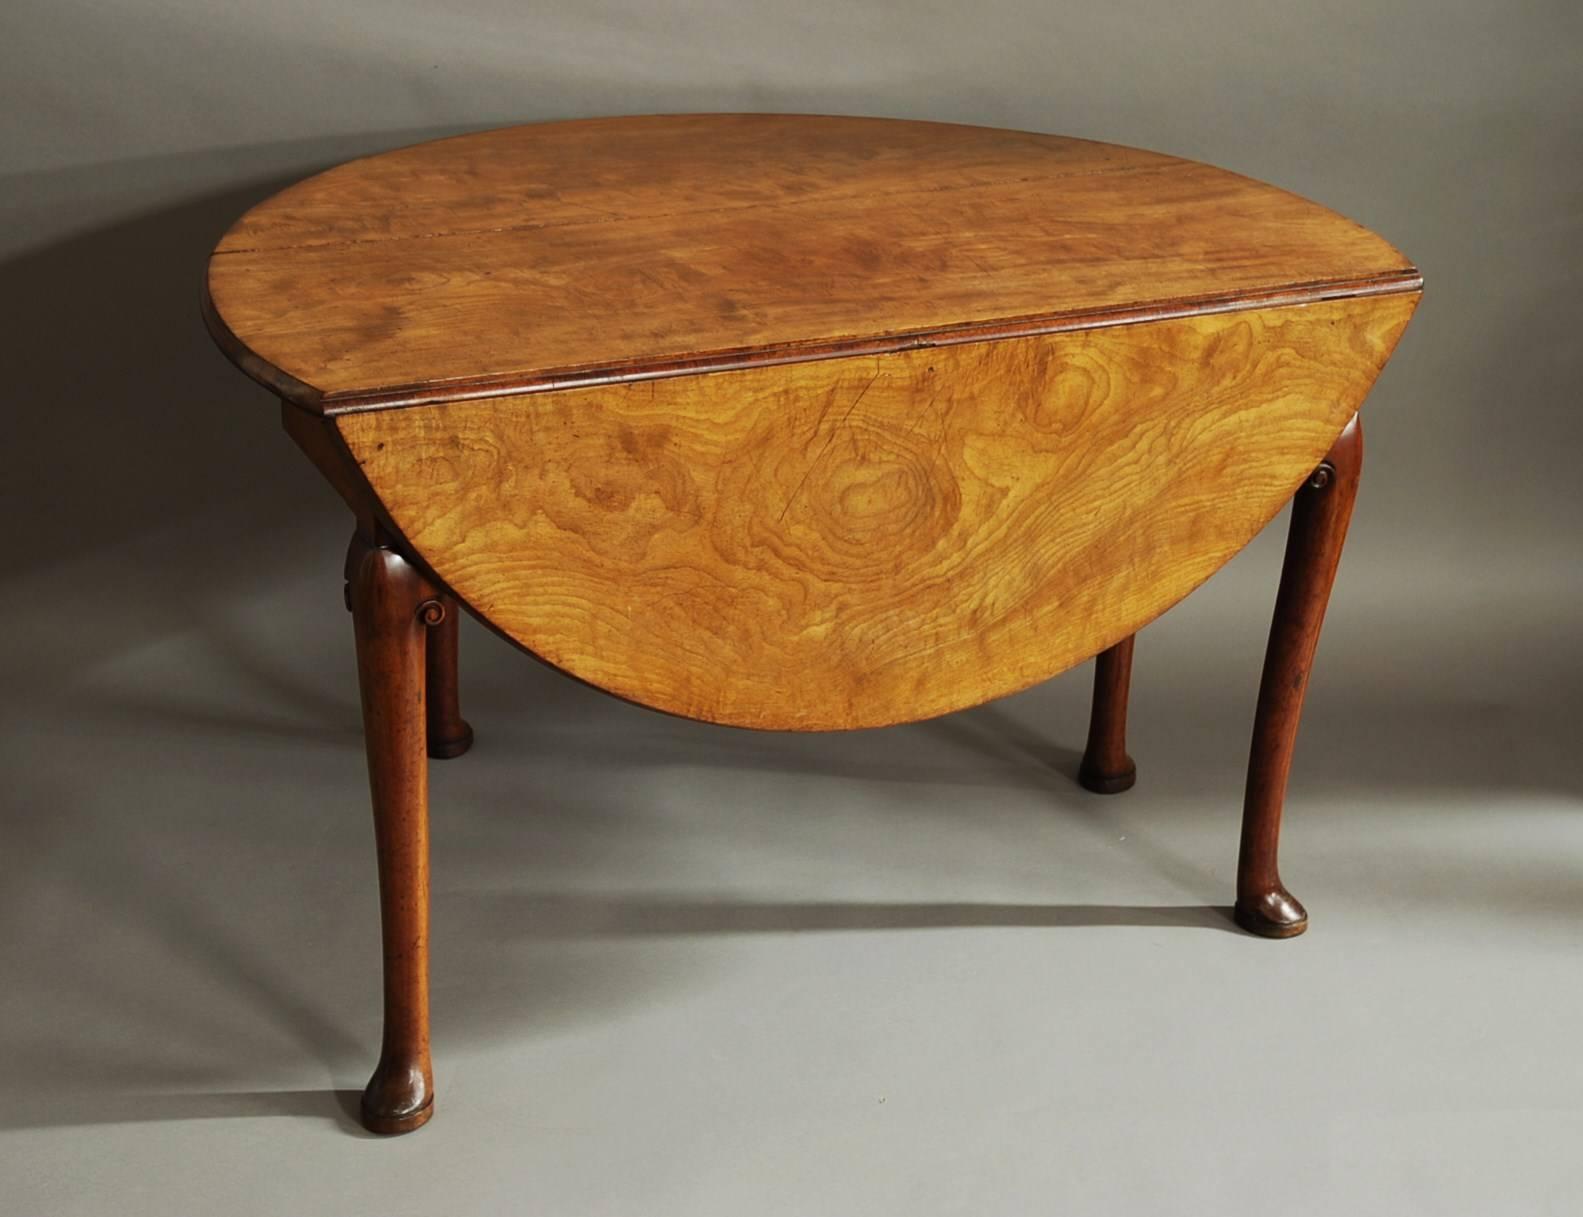 A mid-18th century solid well figured mahogany circular pad foot table in good original condition with fine and faded patina (color).

This table consists of a solid well figured mahogany top with a moulded edge leading down to four, tapered round